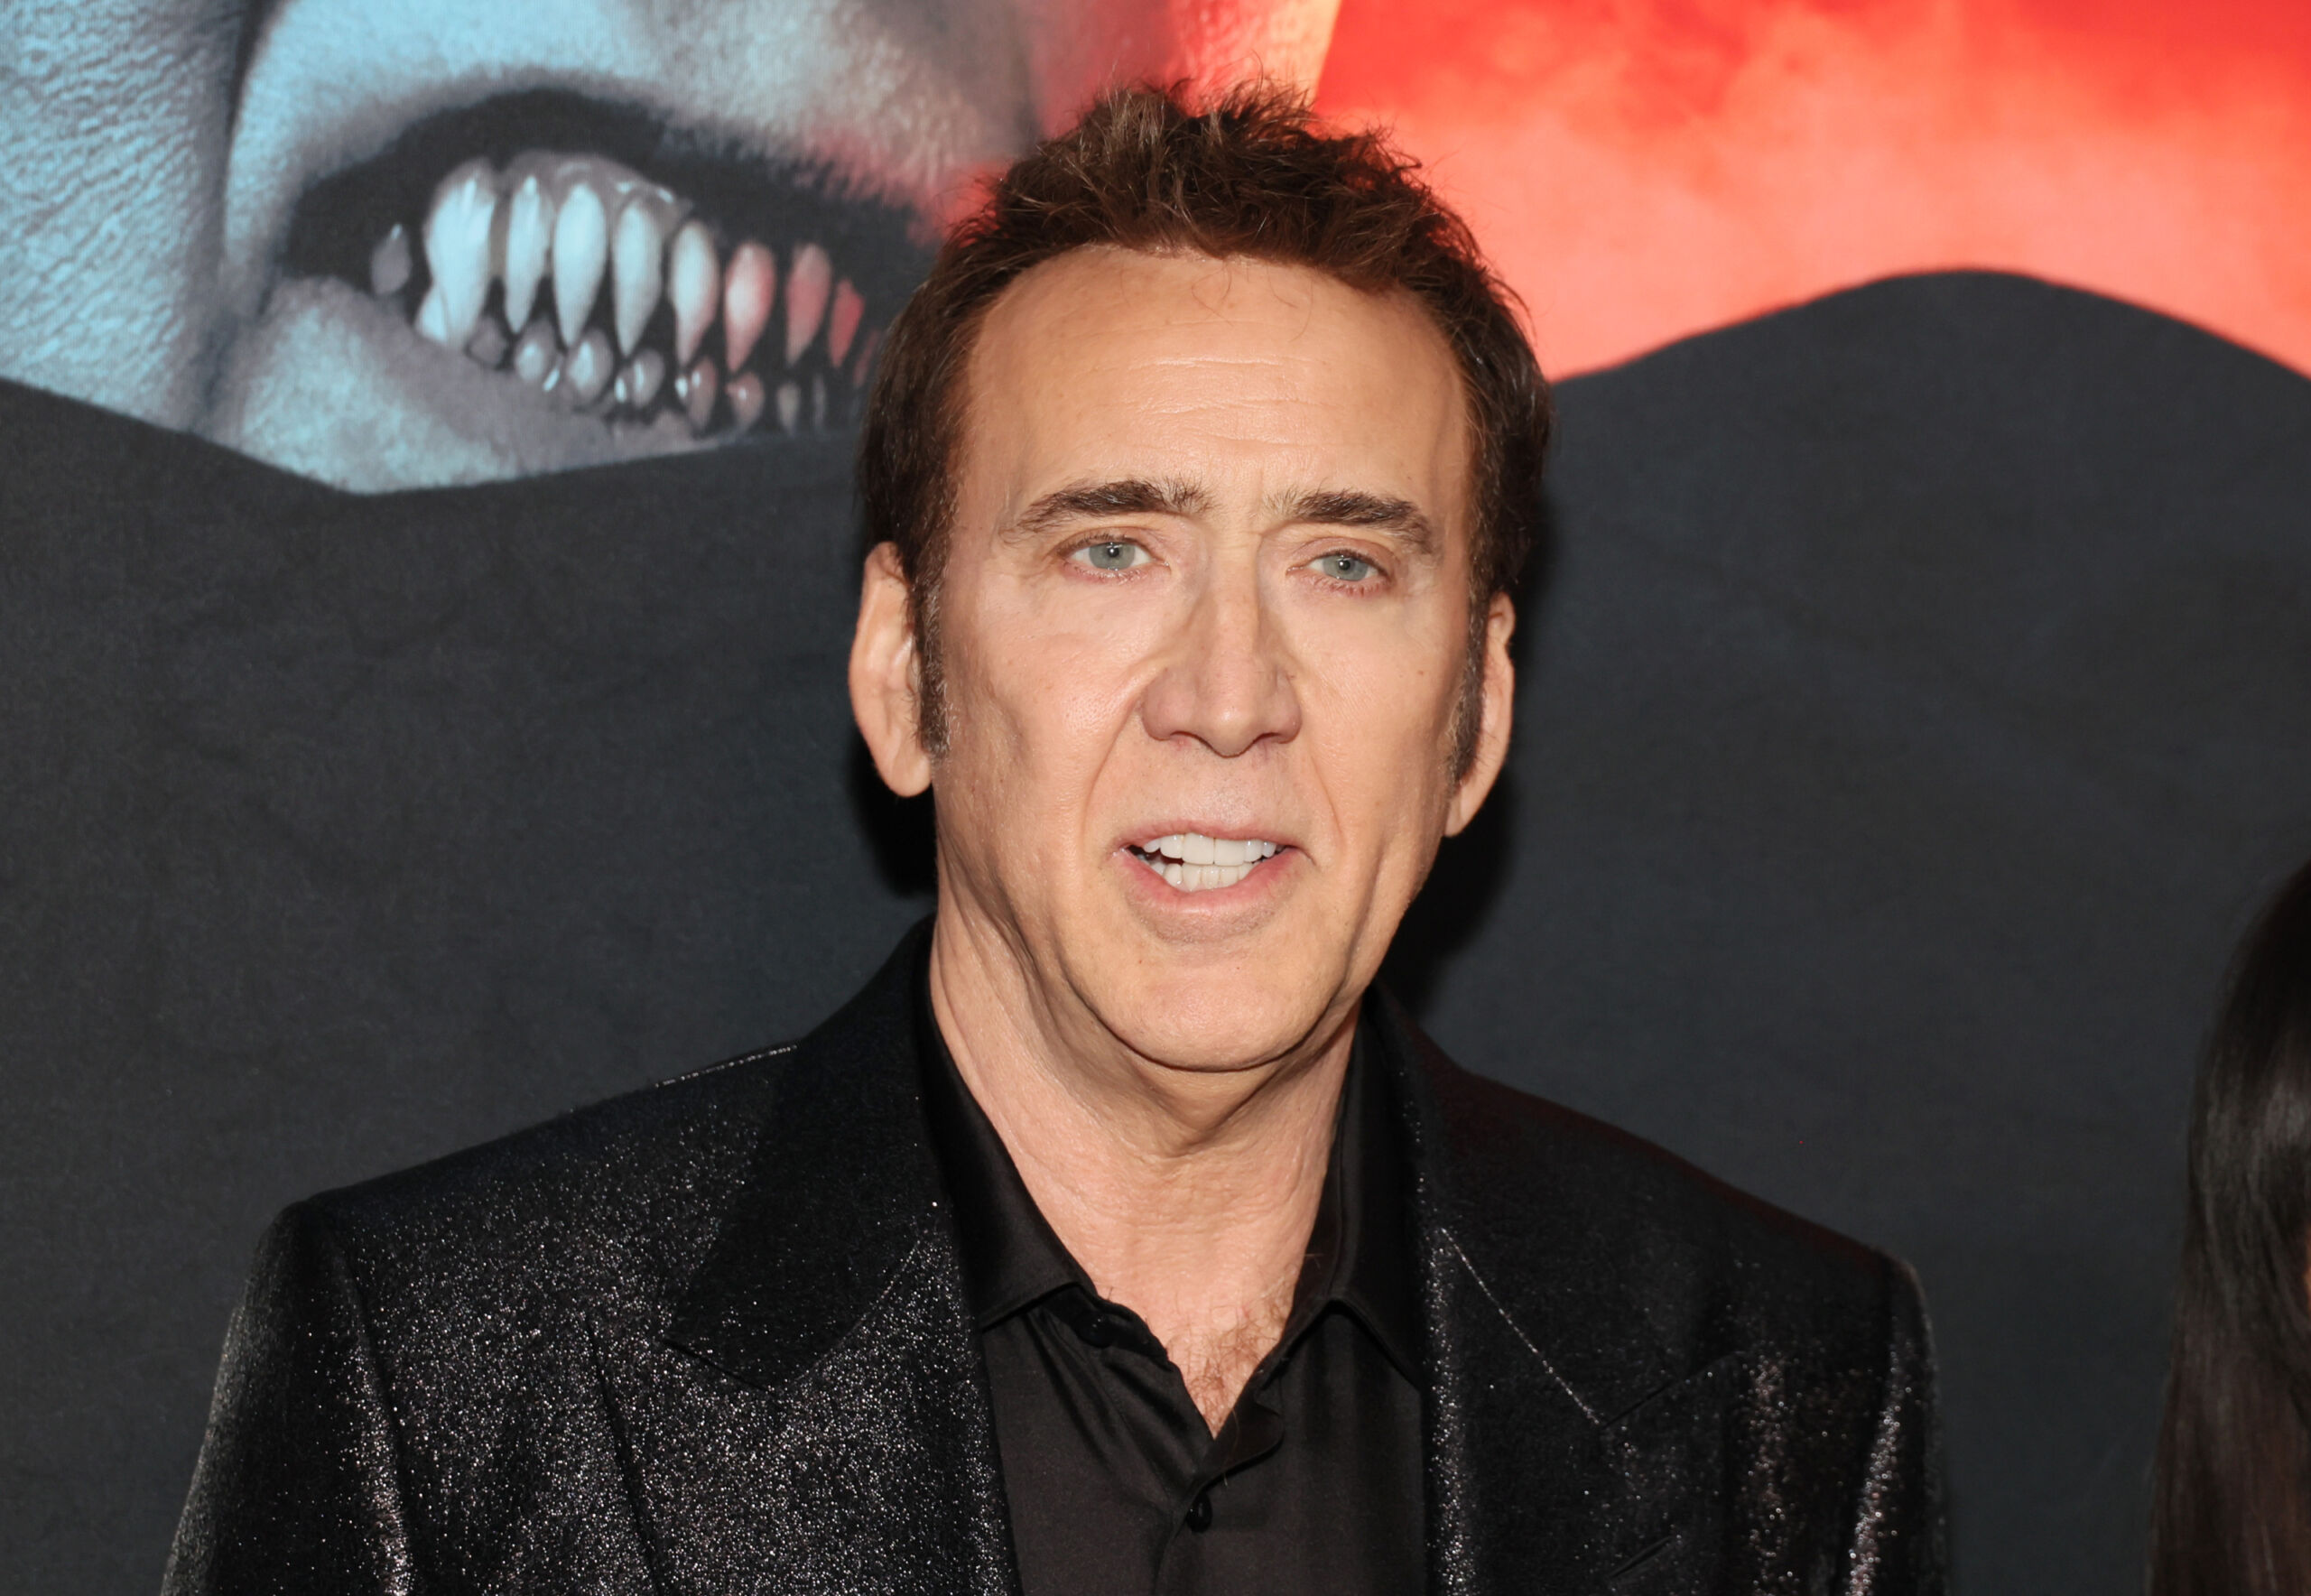 36 Facts About Nicolas Cage - Facts.net